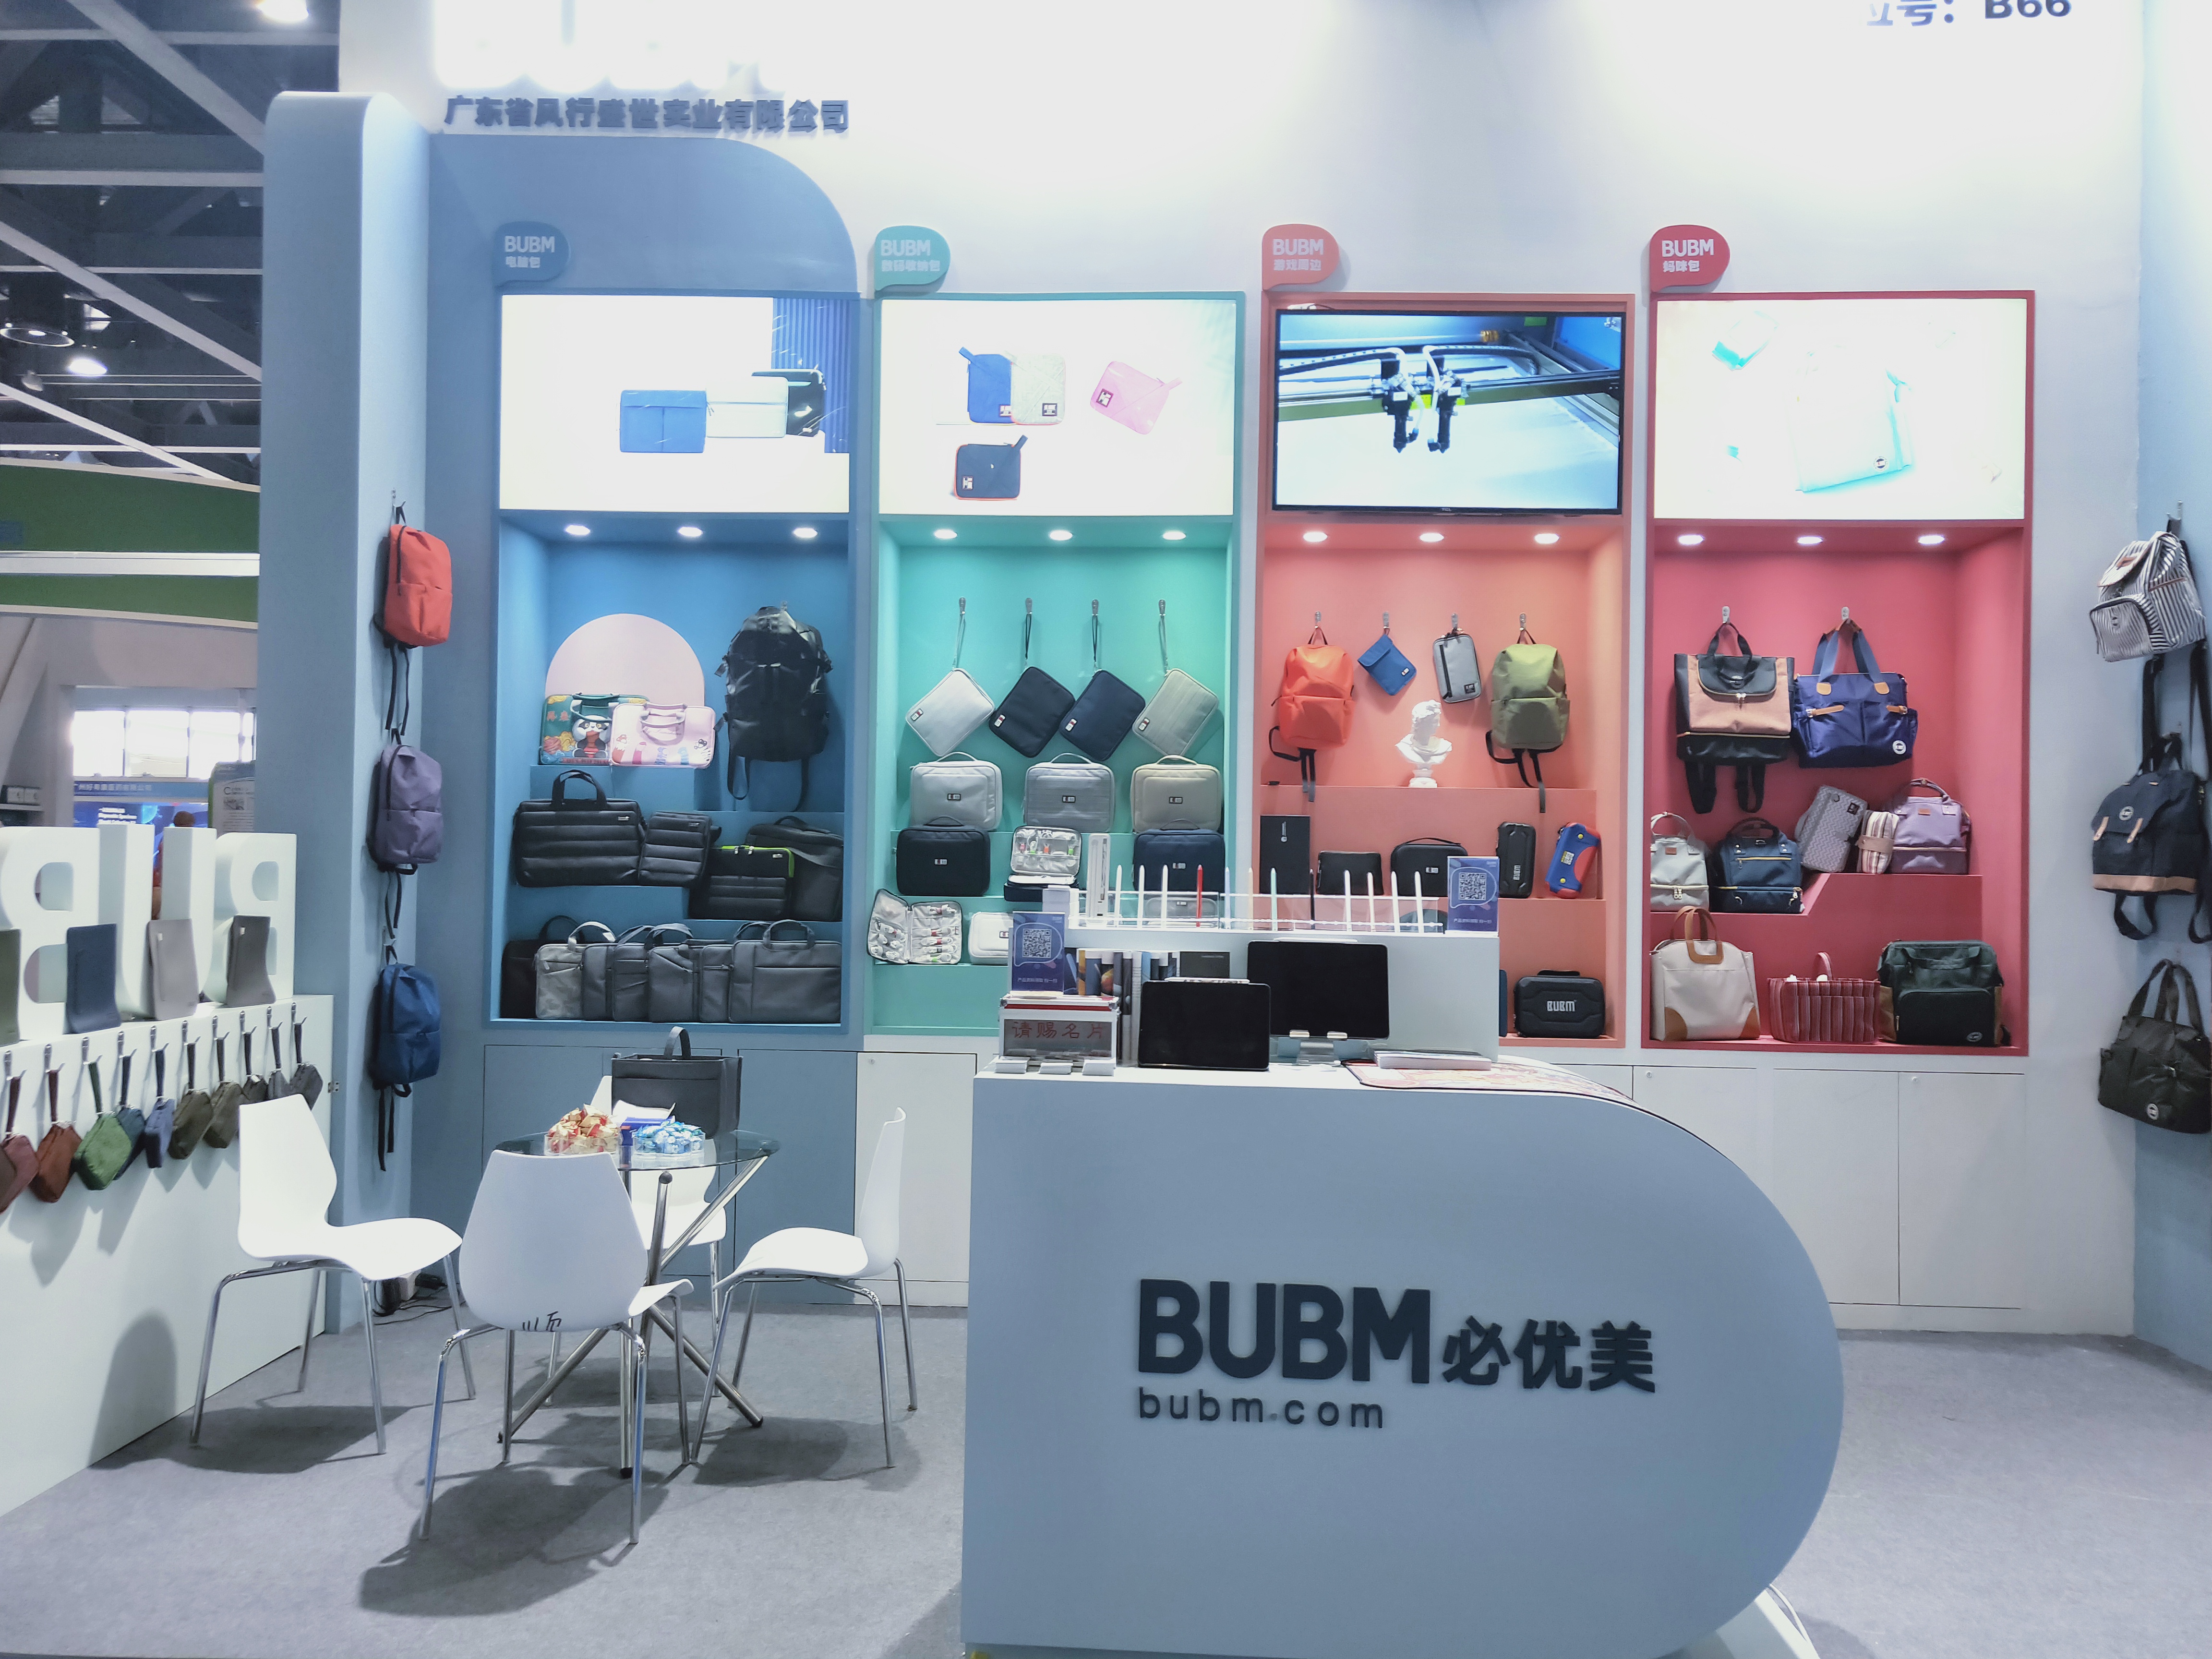 About BUBM Industrial Co., Ltd.